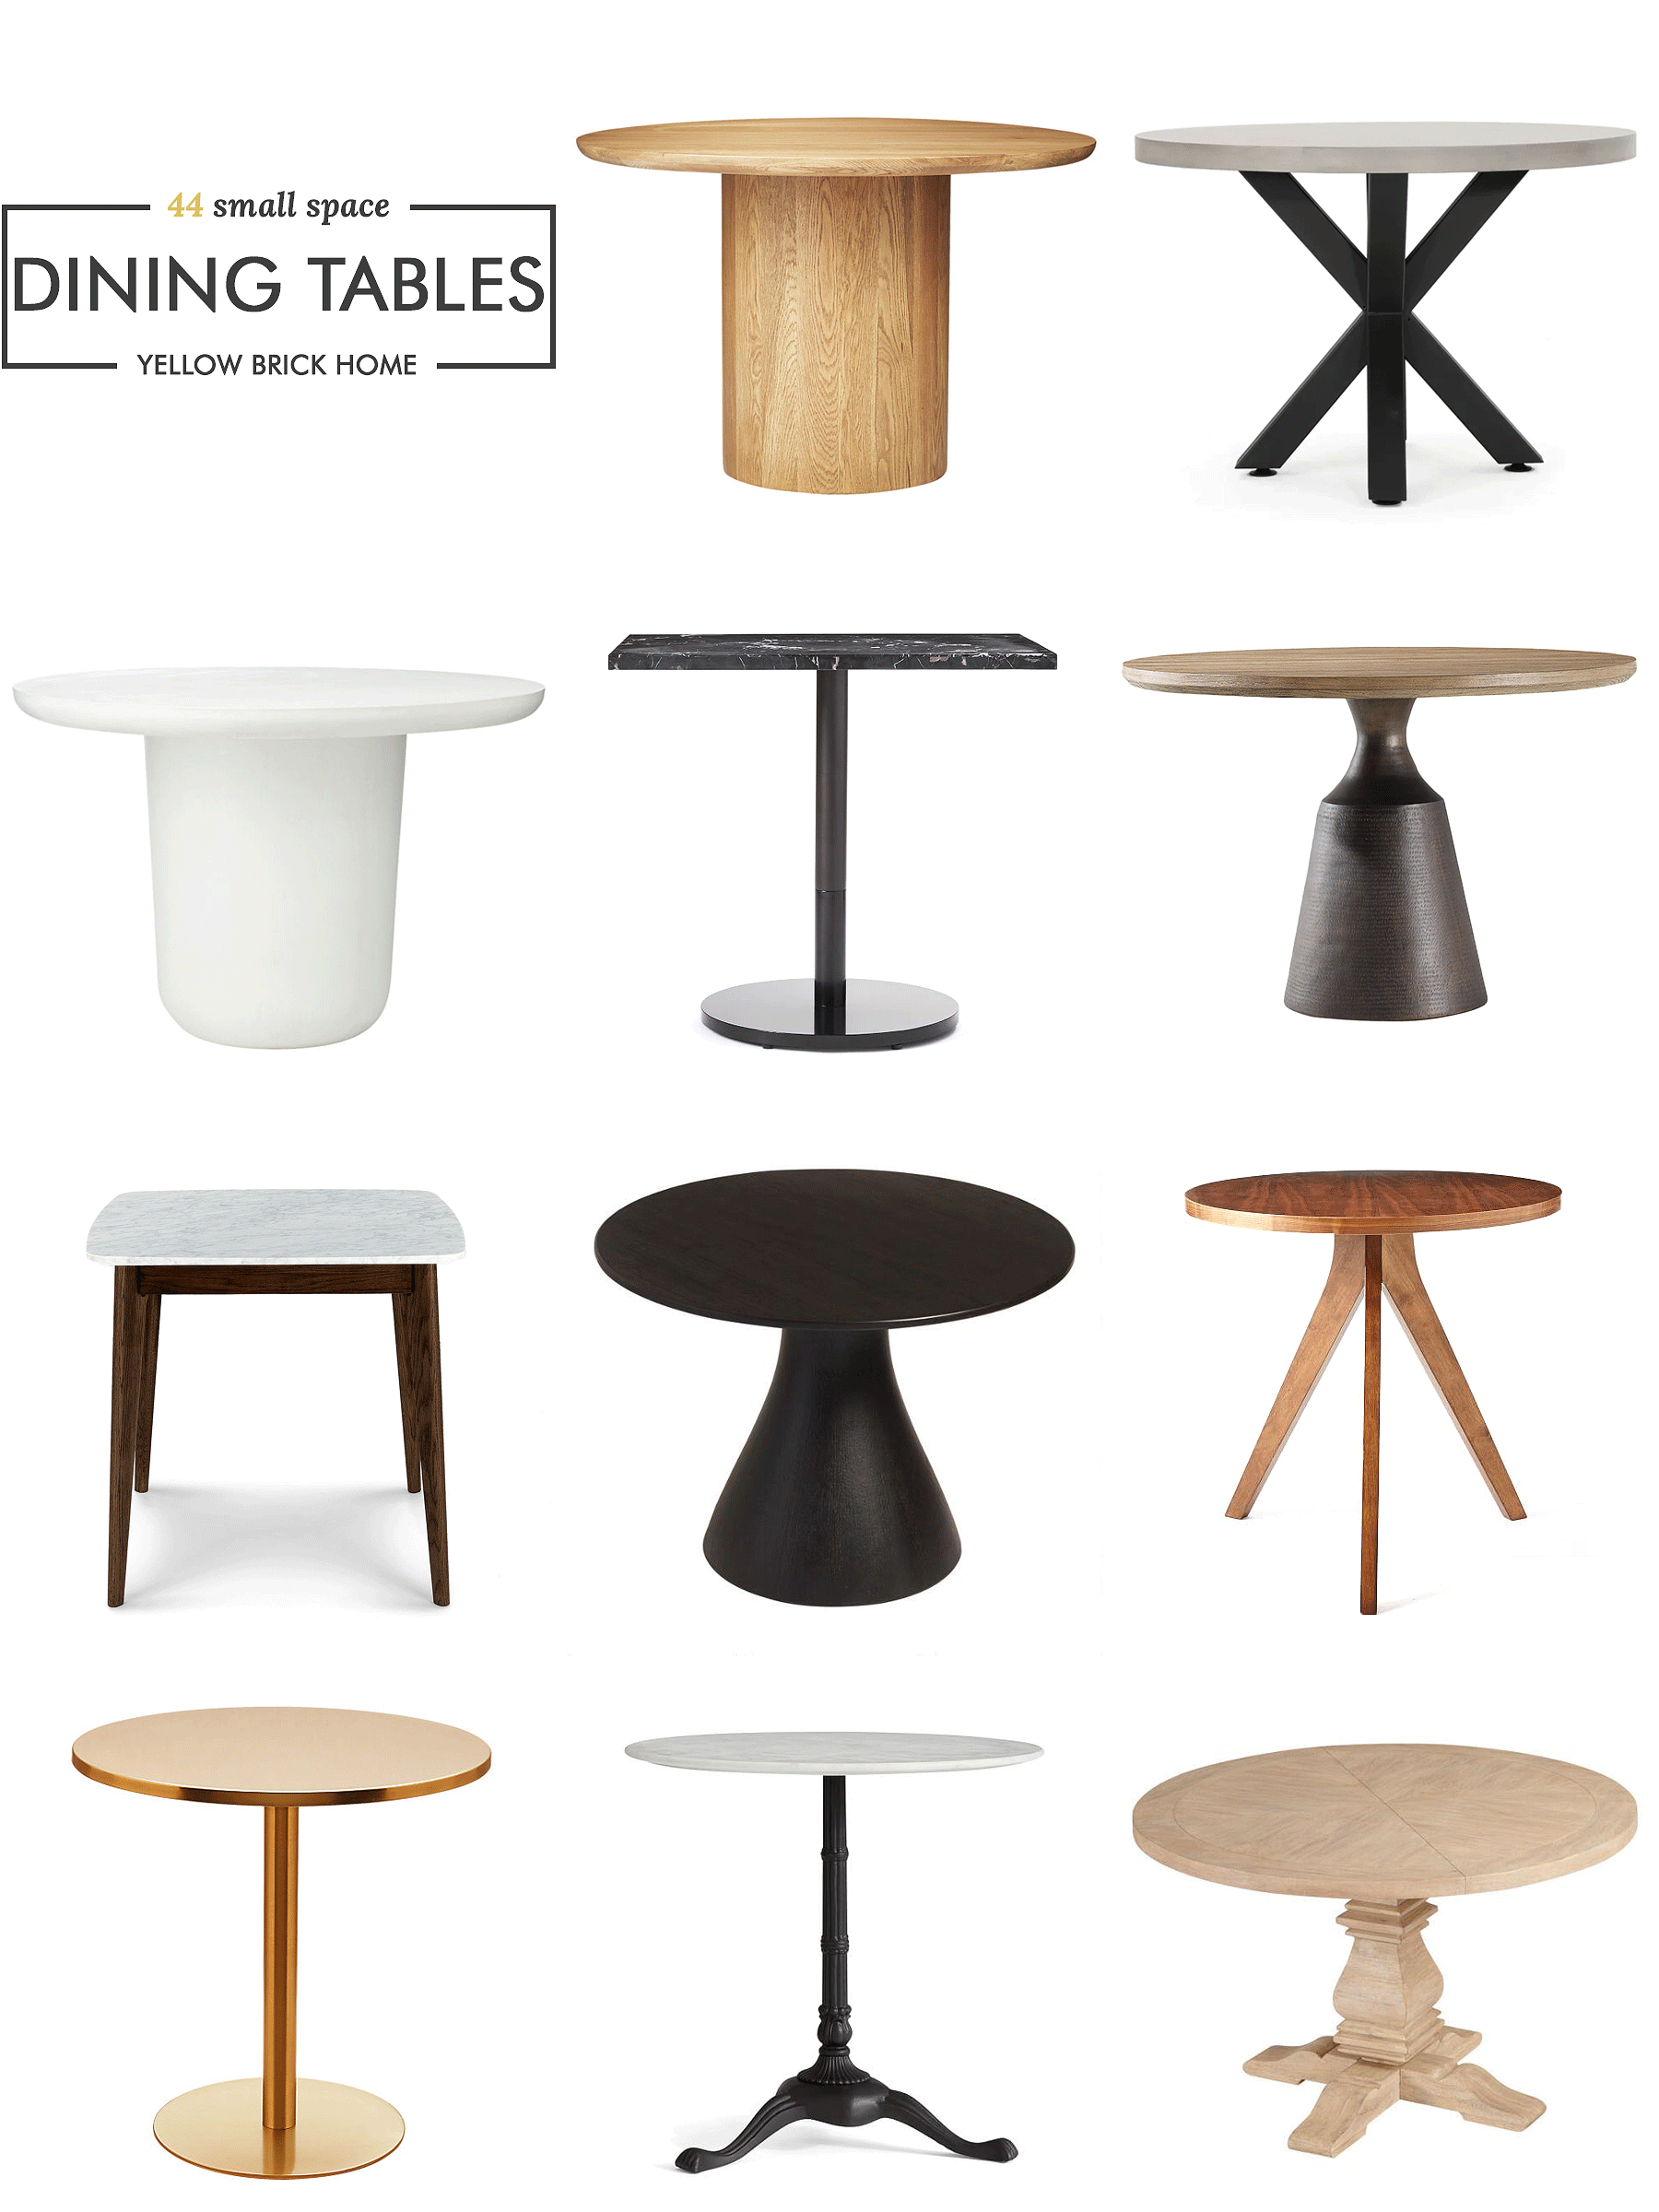 44 Dining Tables For When You Re Short, 44 Inch Round Dining Table With Chairs